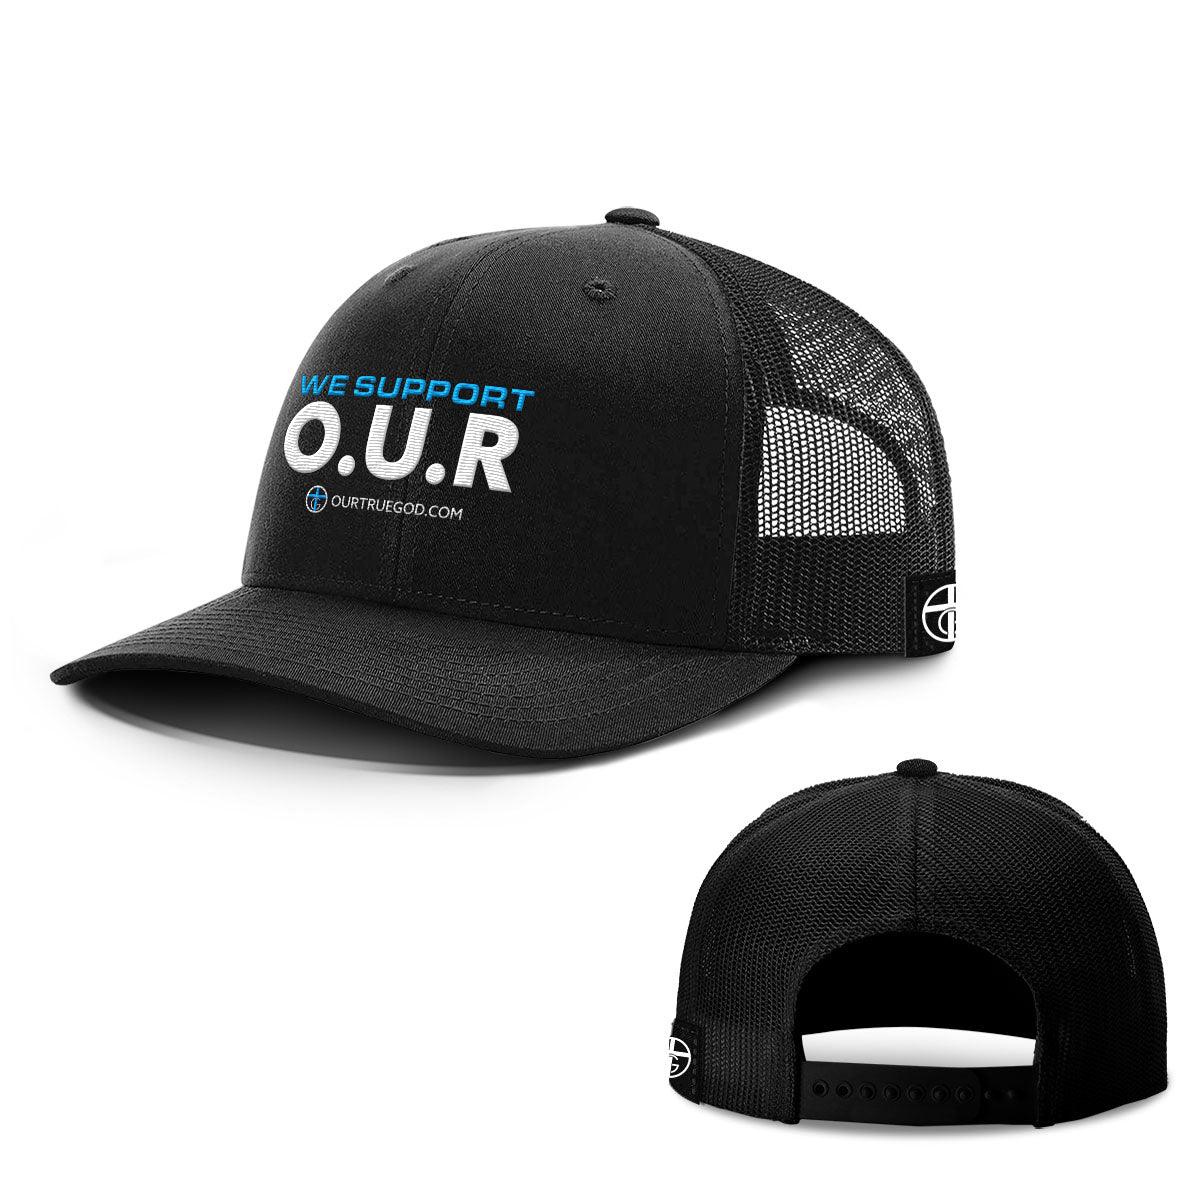 We Support O.U.R Hats - Our True God